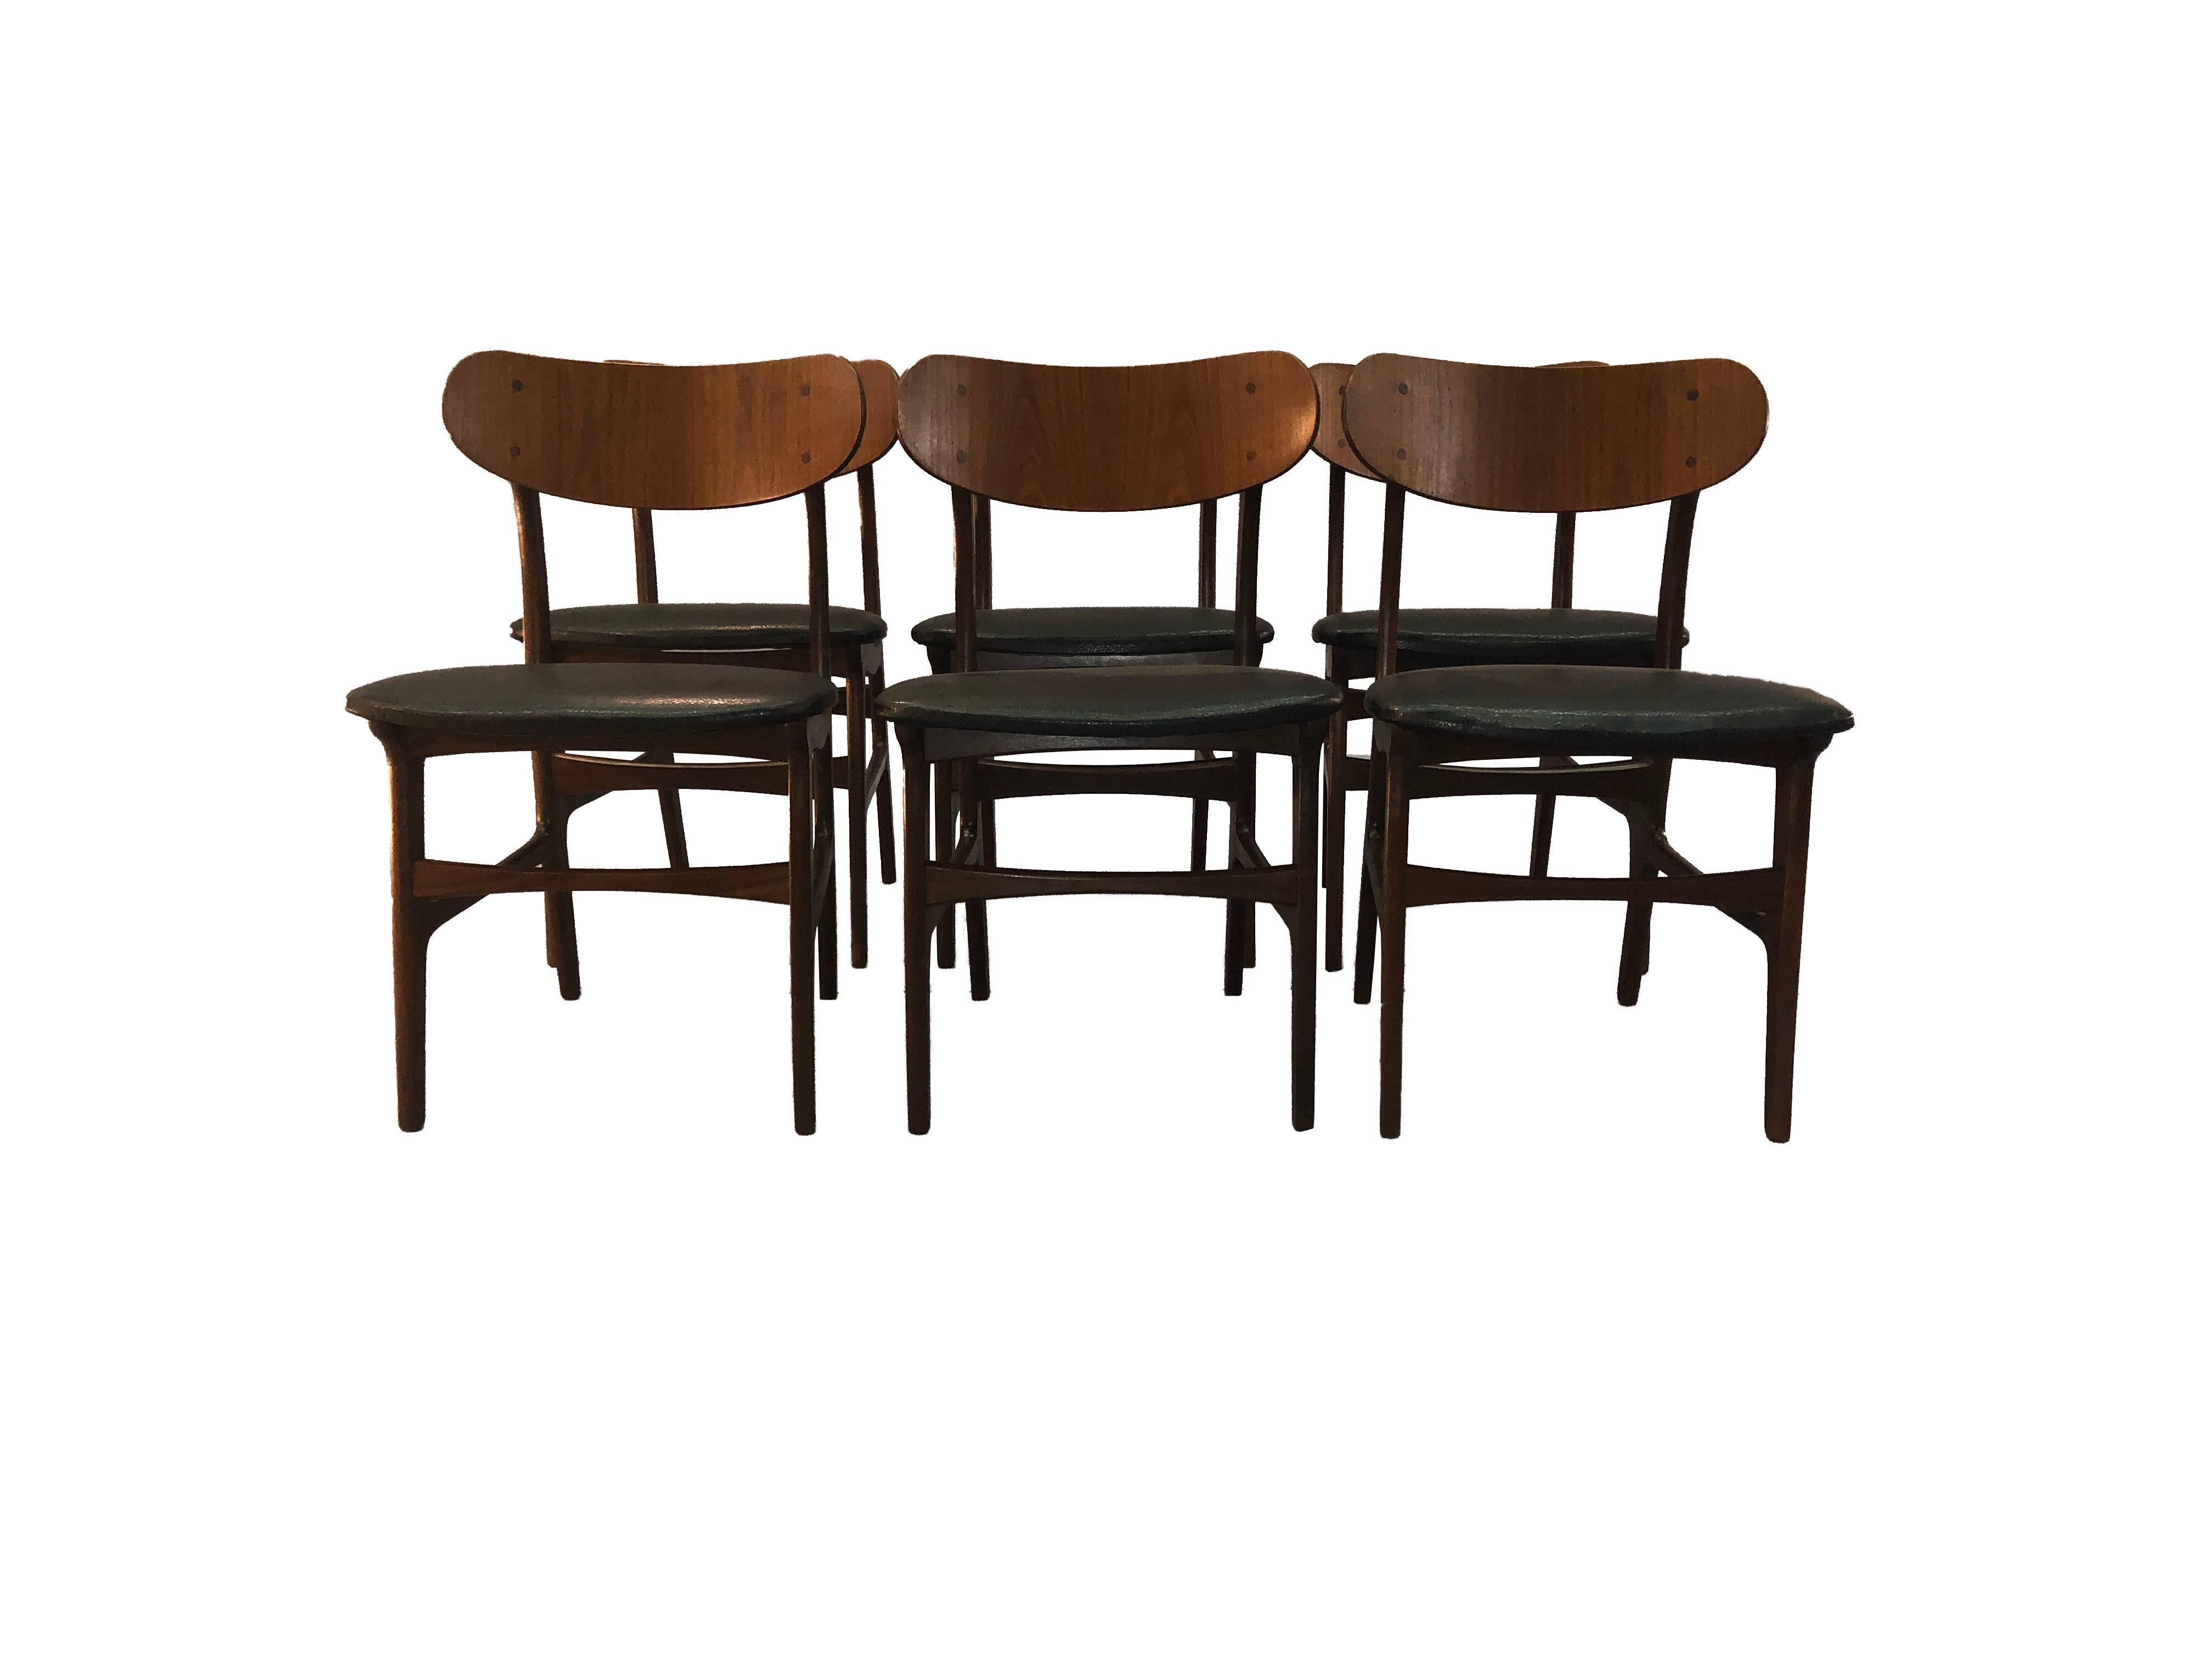 Scandinavian Modern 1960s set of six Danish teak round back dining room chairs with new Naugahyde seats. The chairs are attributed to Johannes Anderson design. Newly refinished. Seat, 18.25 inches H. Unmarked.